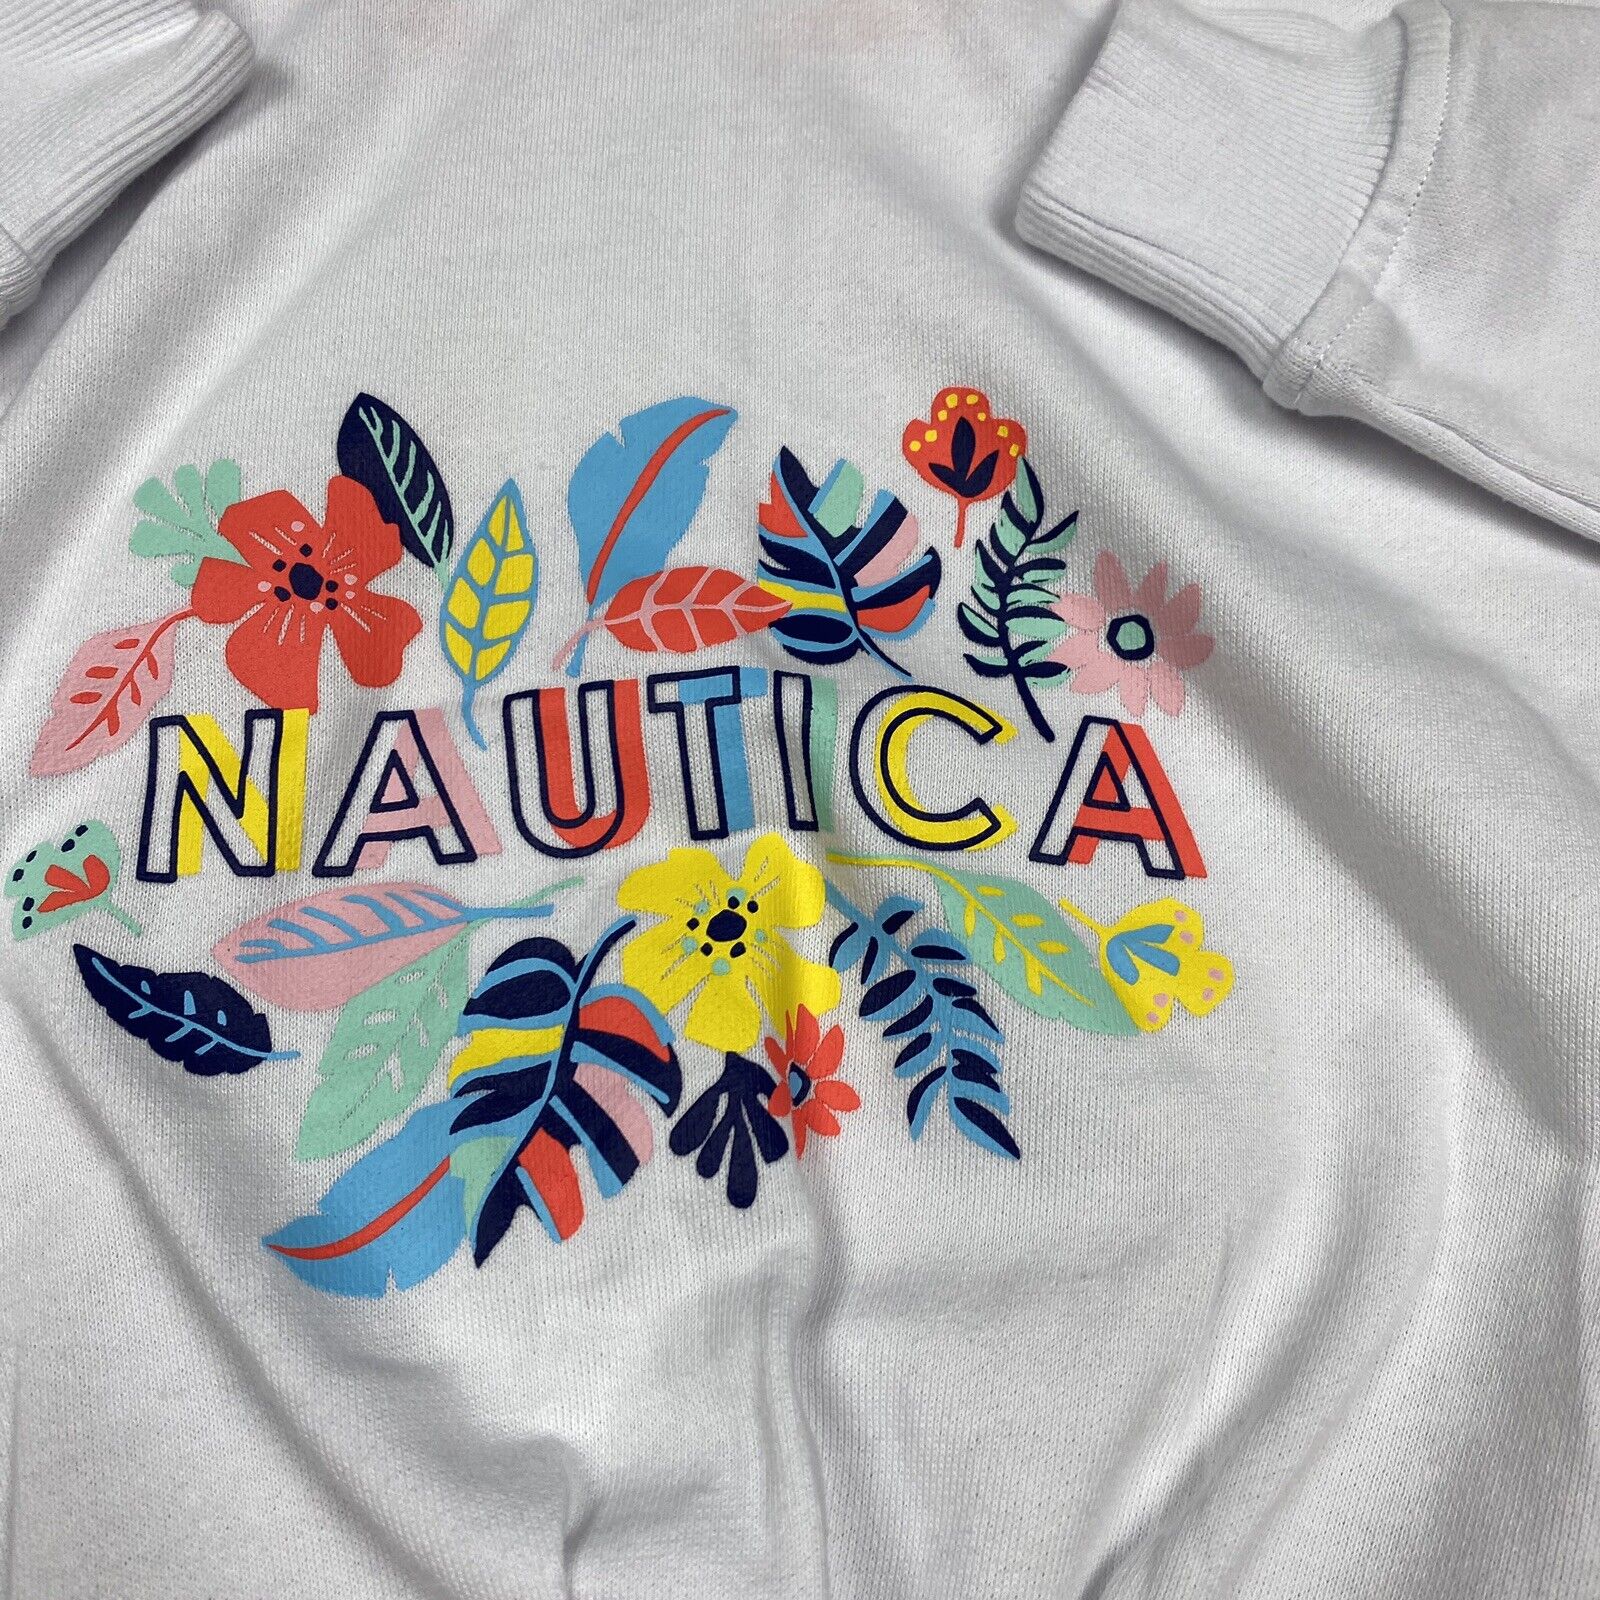 New NAUTICA Hoodie Jacket Zip Up Girl's Size 6 White Floral Graphic School Nautica Does Not Apply - фотография #3